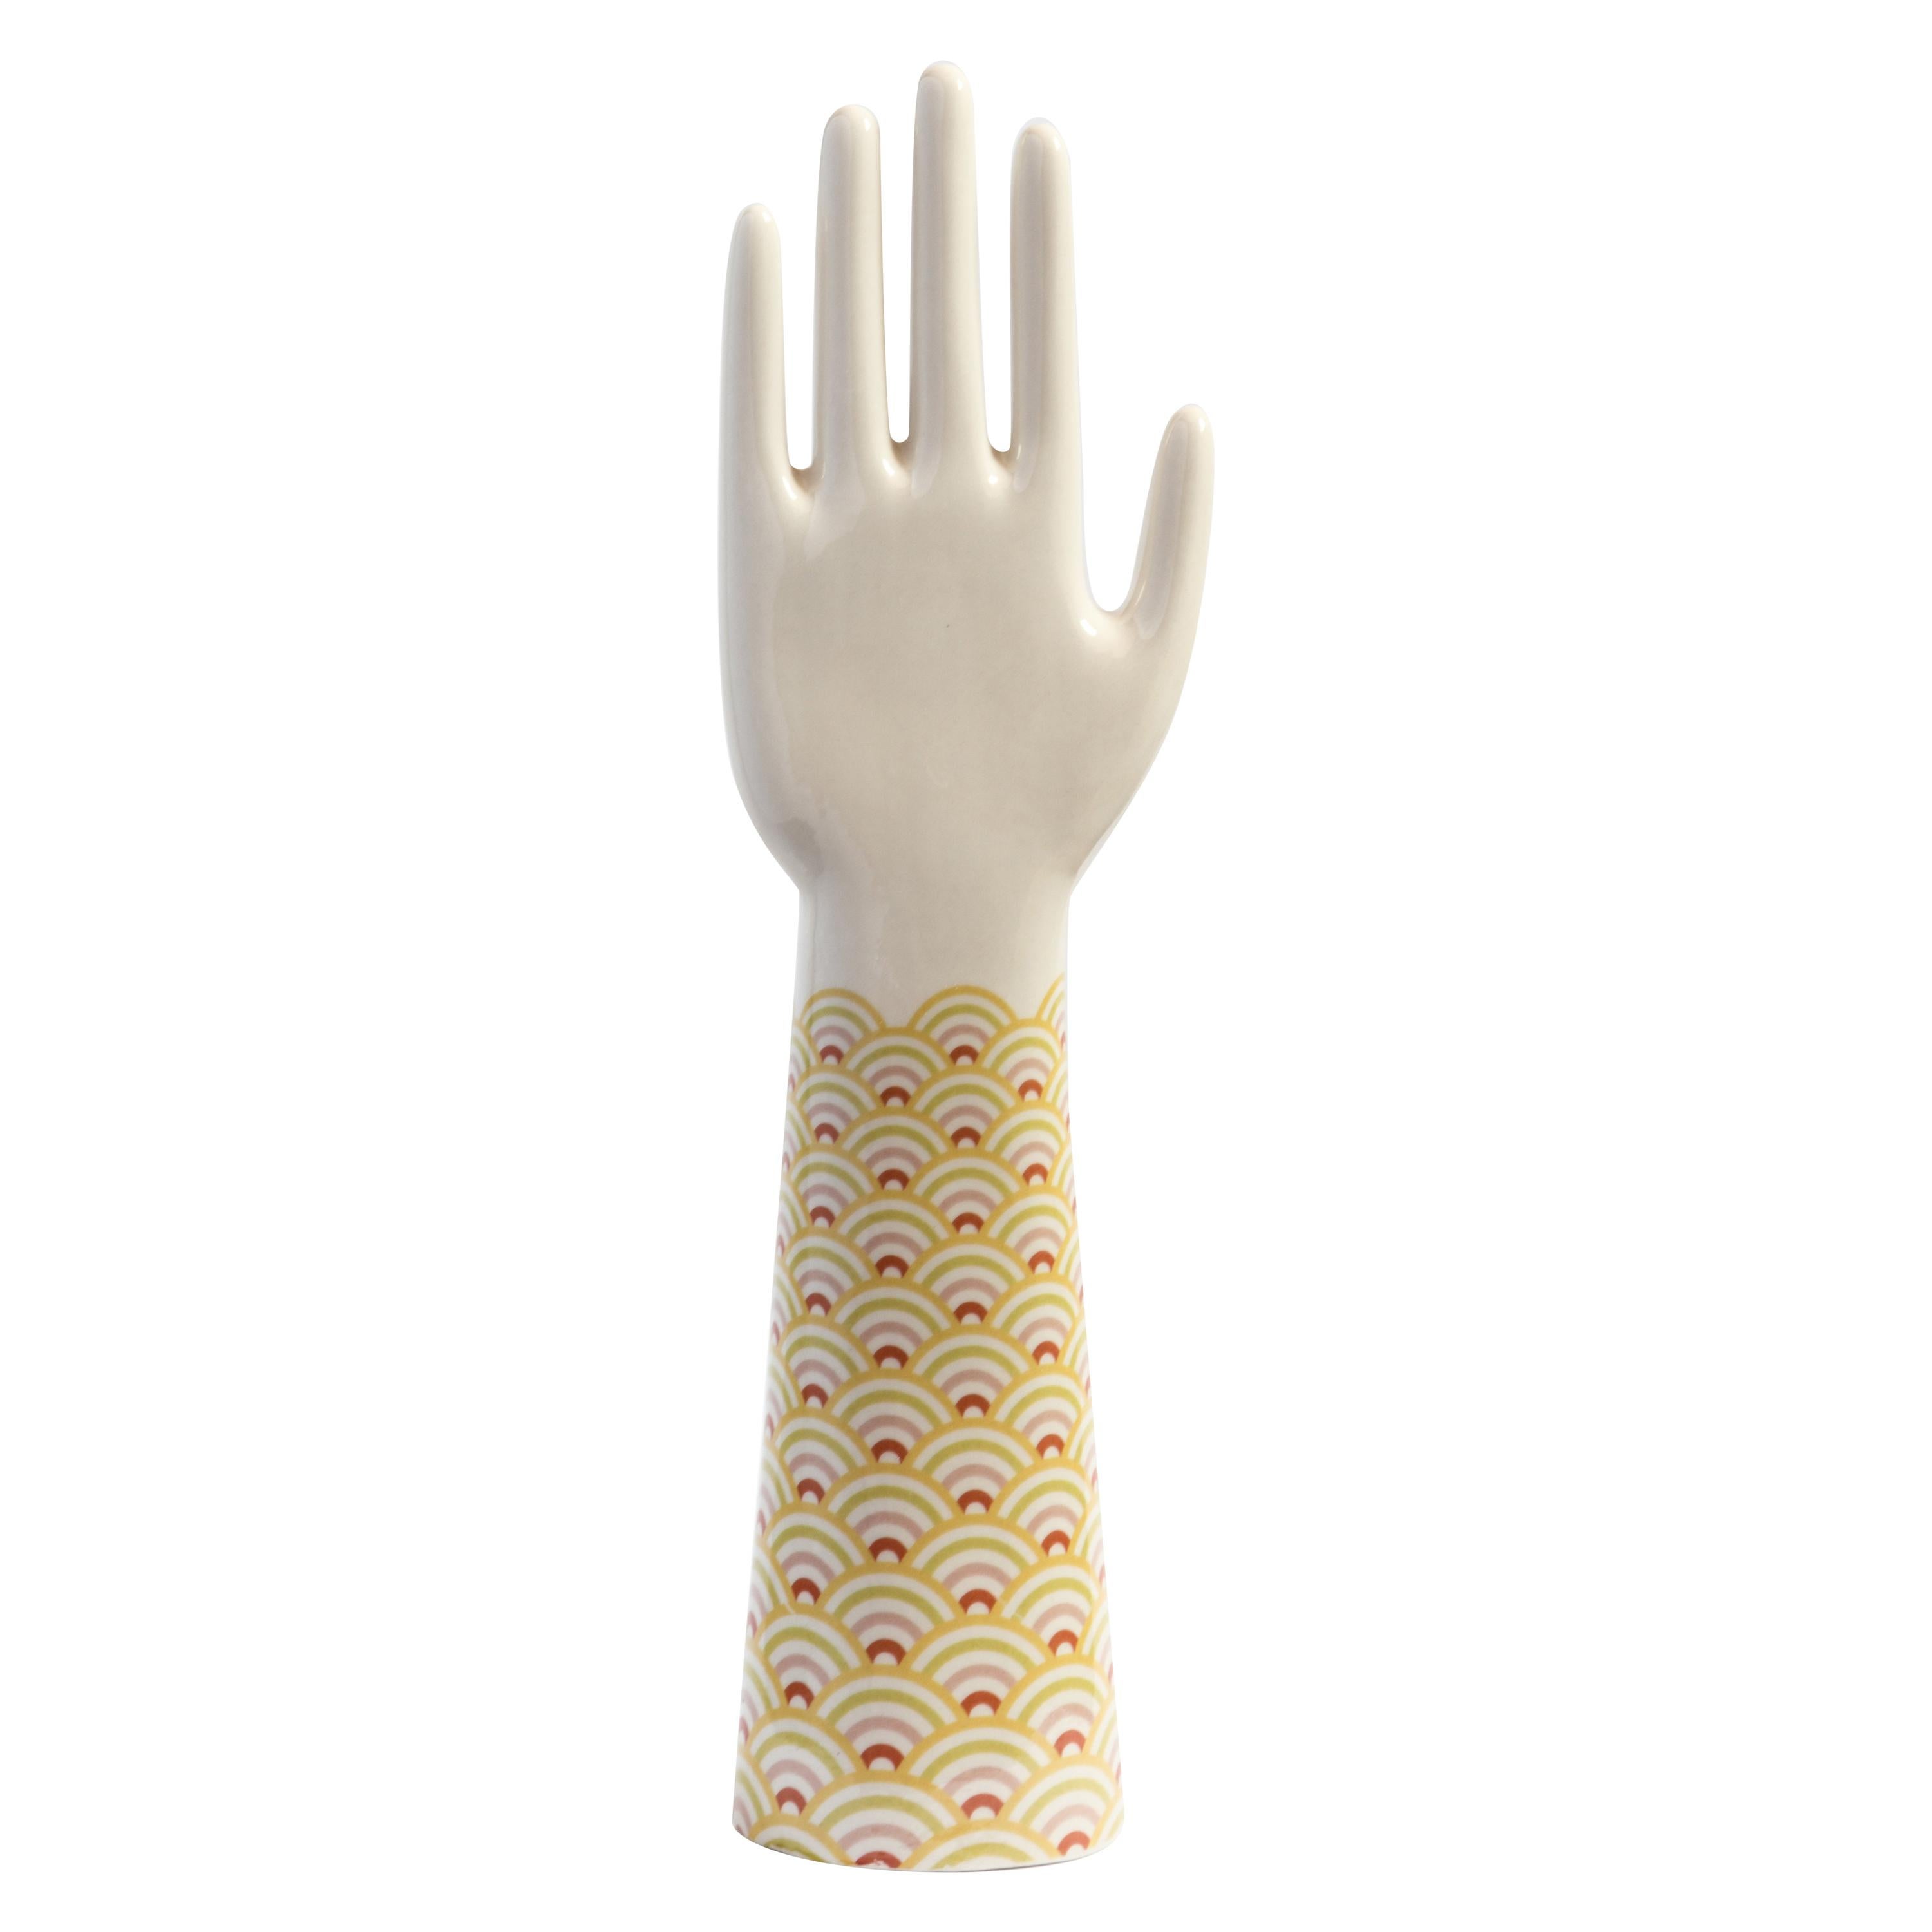 Anatomica, Porcelain Hand with Scales Decoration by Vito Nesta For Sale